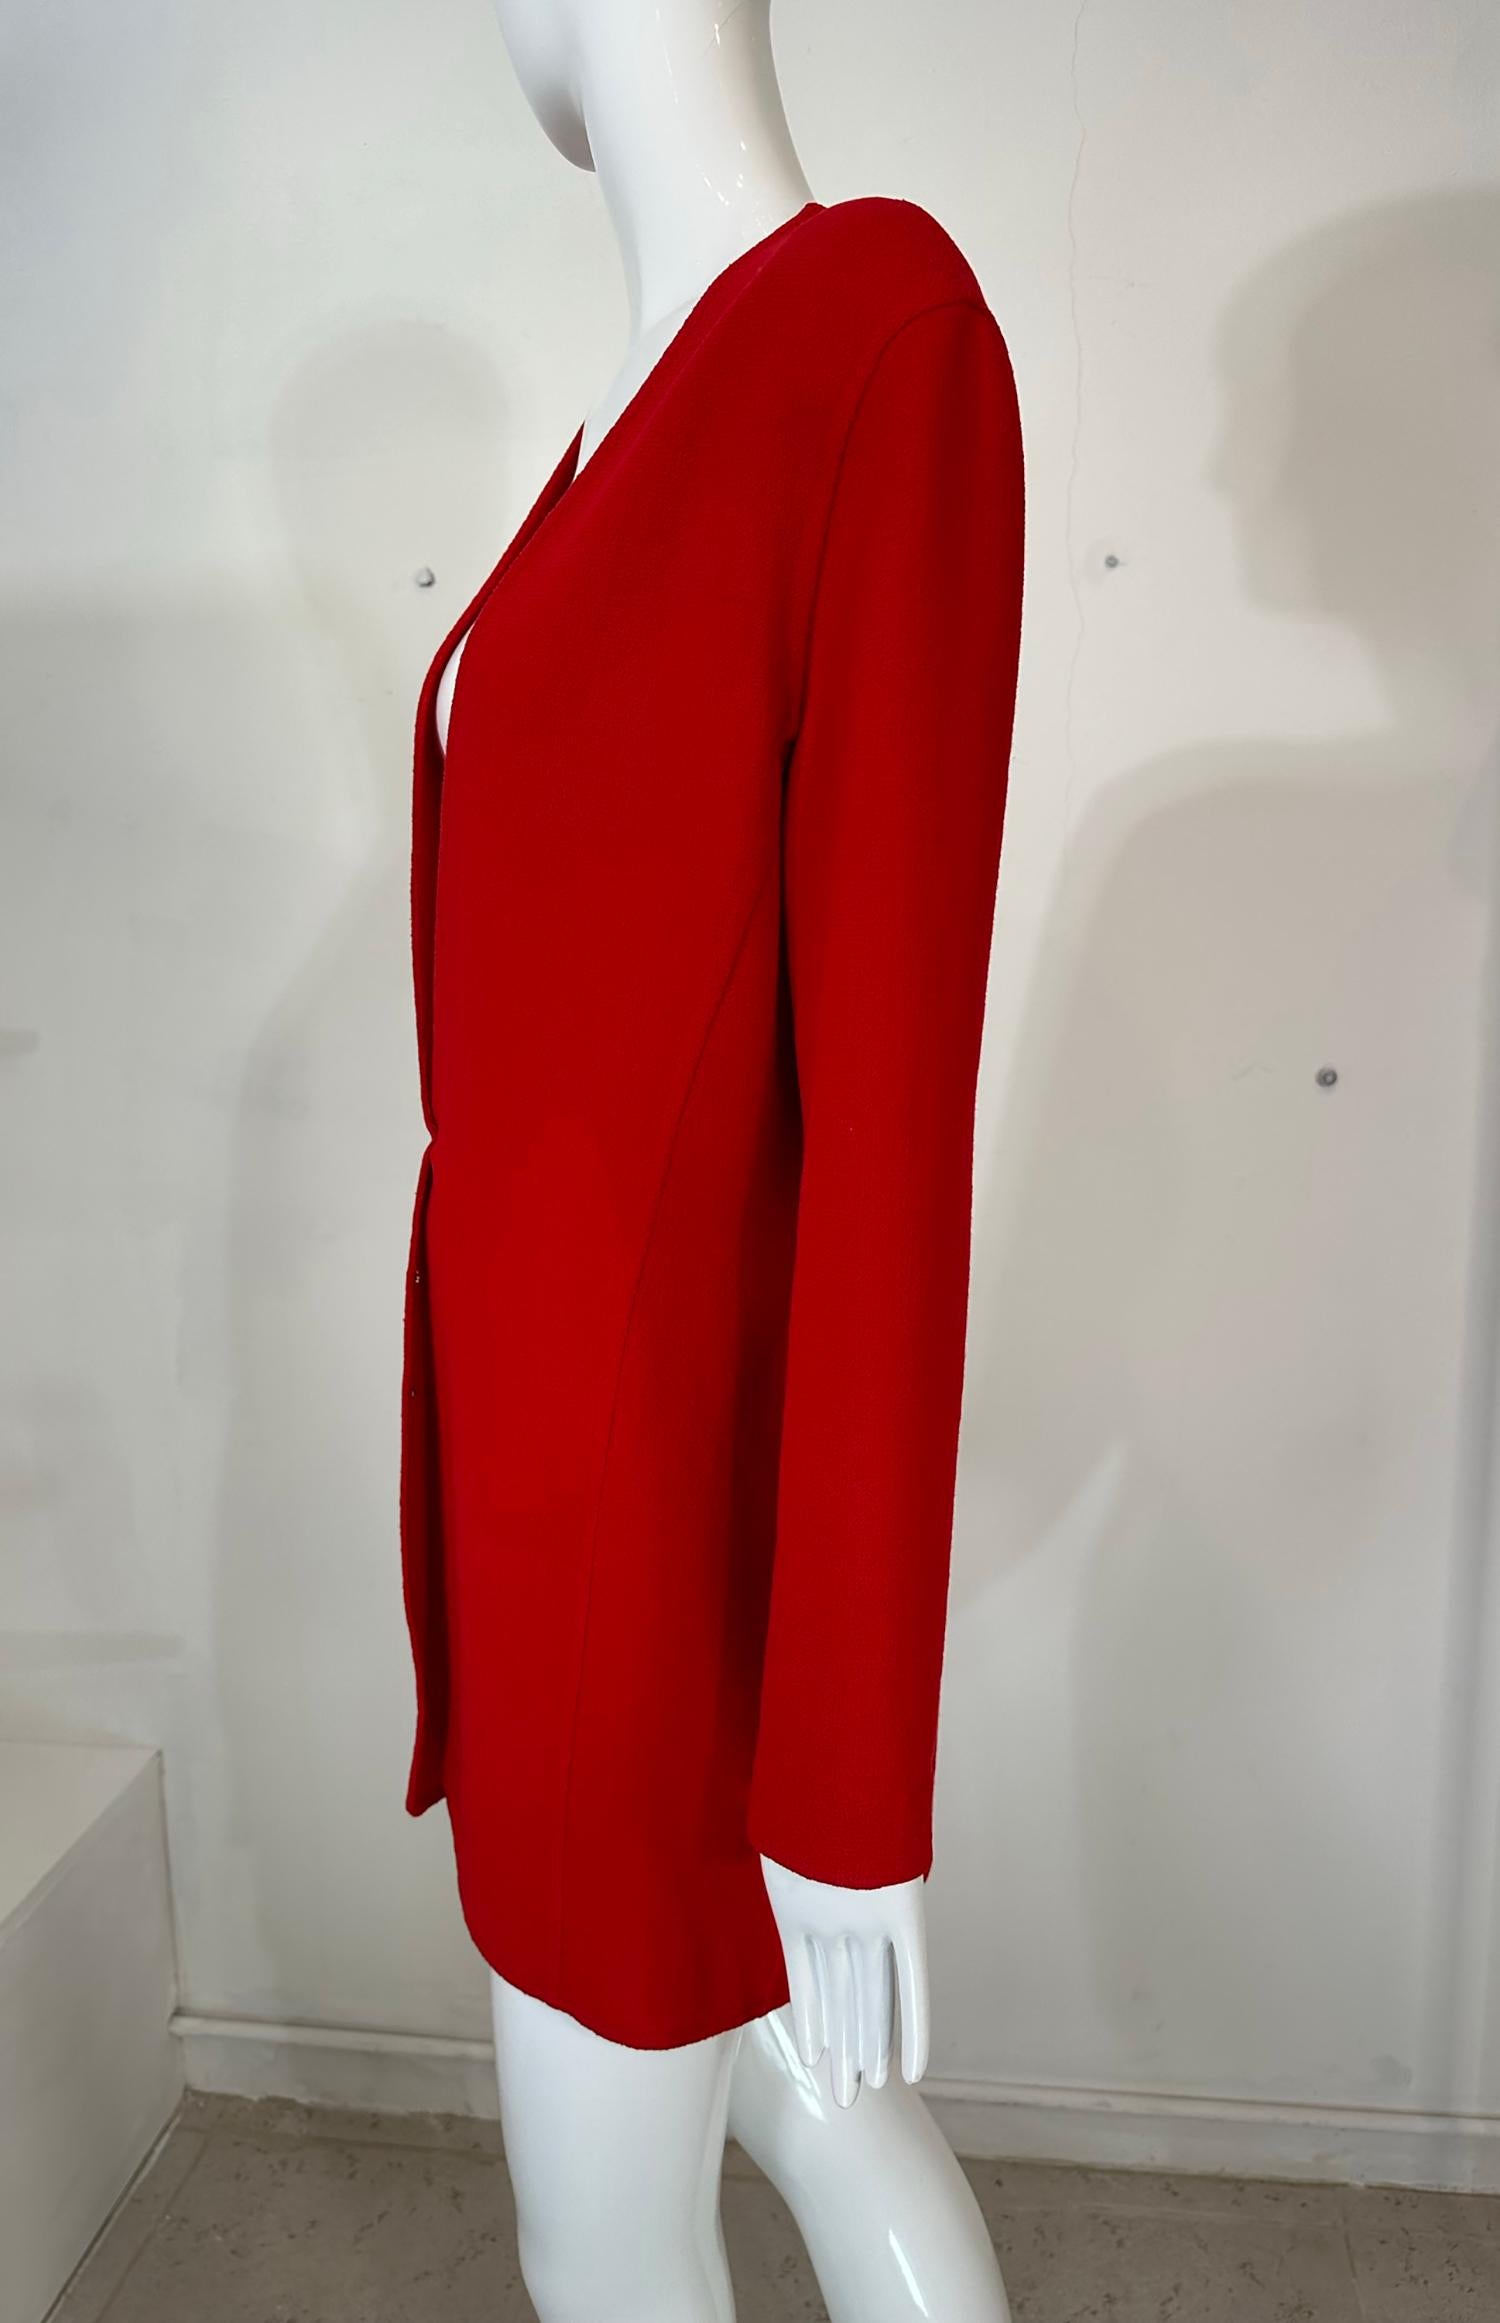 Donna Karan Black Label Fire Engine Red Double Face Wool Jacket For Sale 5